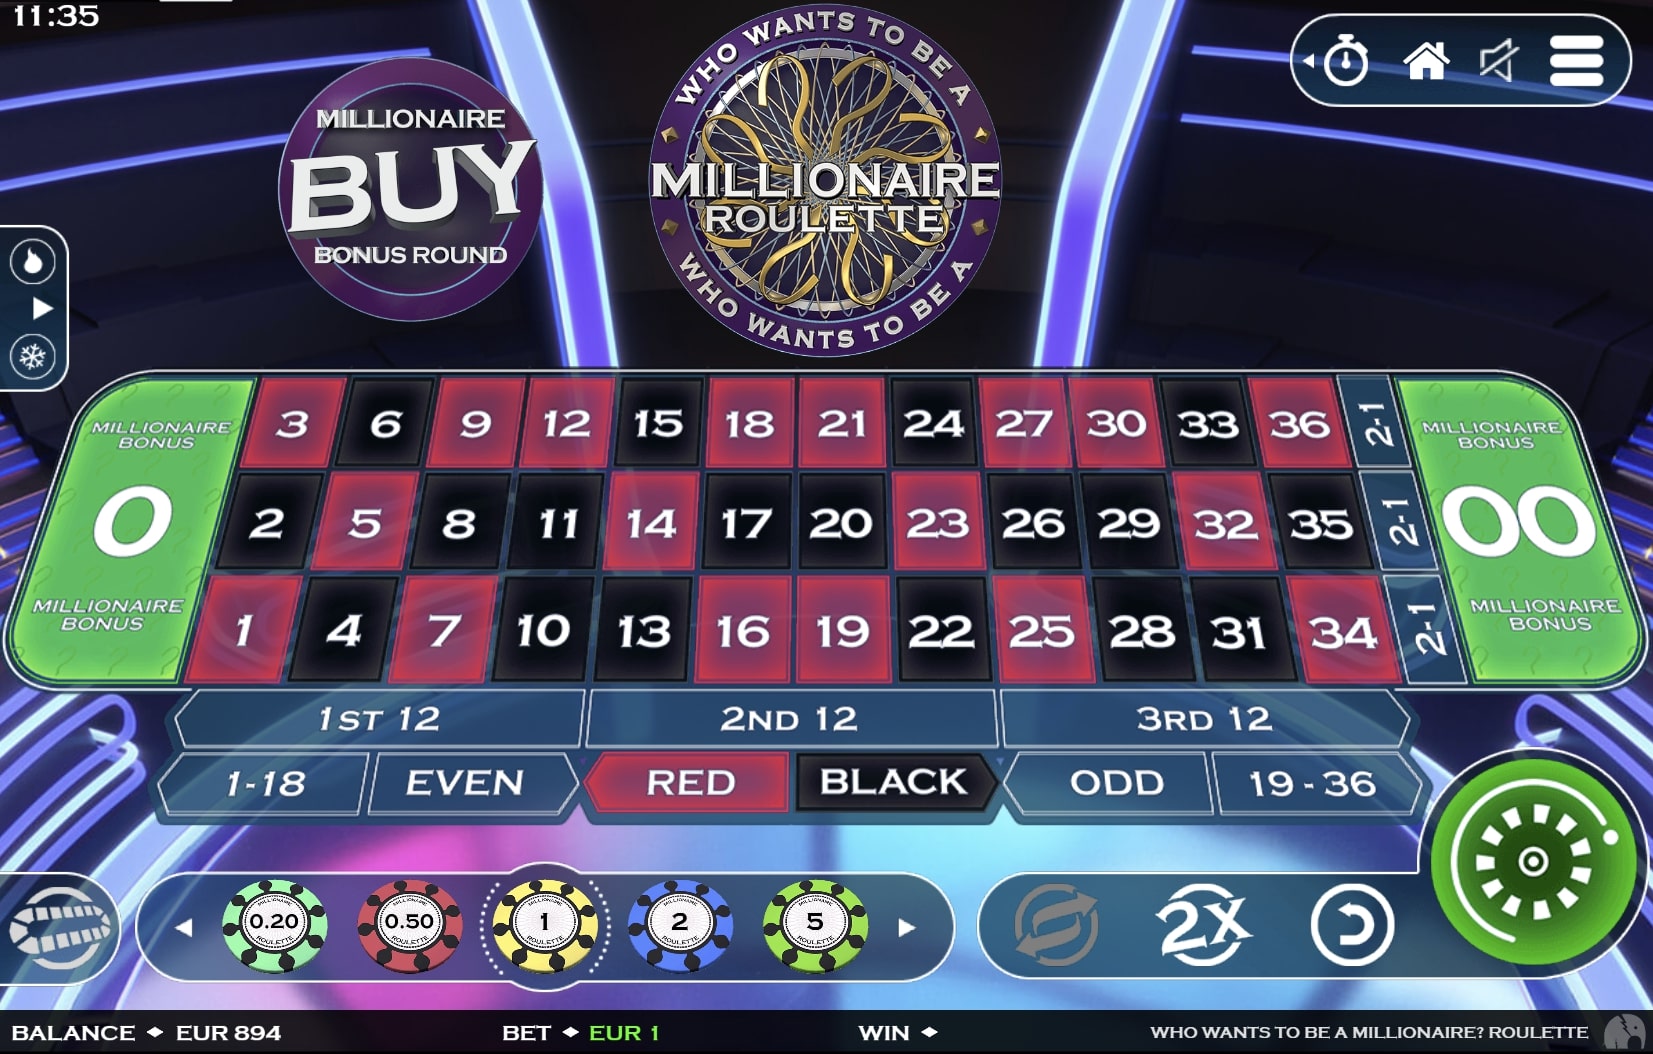 Who Wants To Be a Millionaire Roulette Screenshot